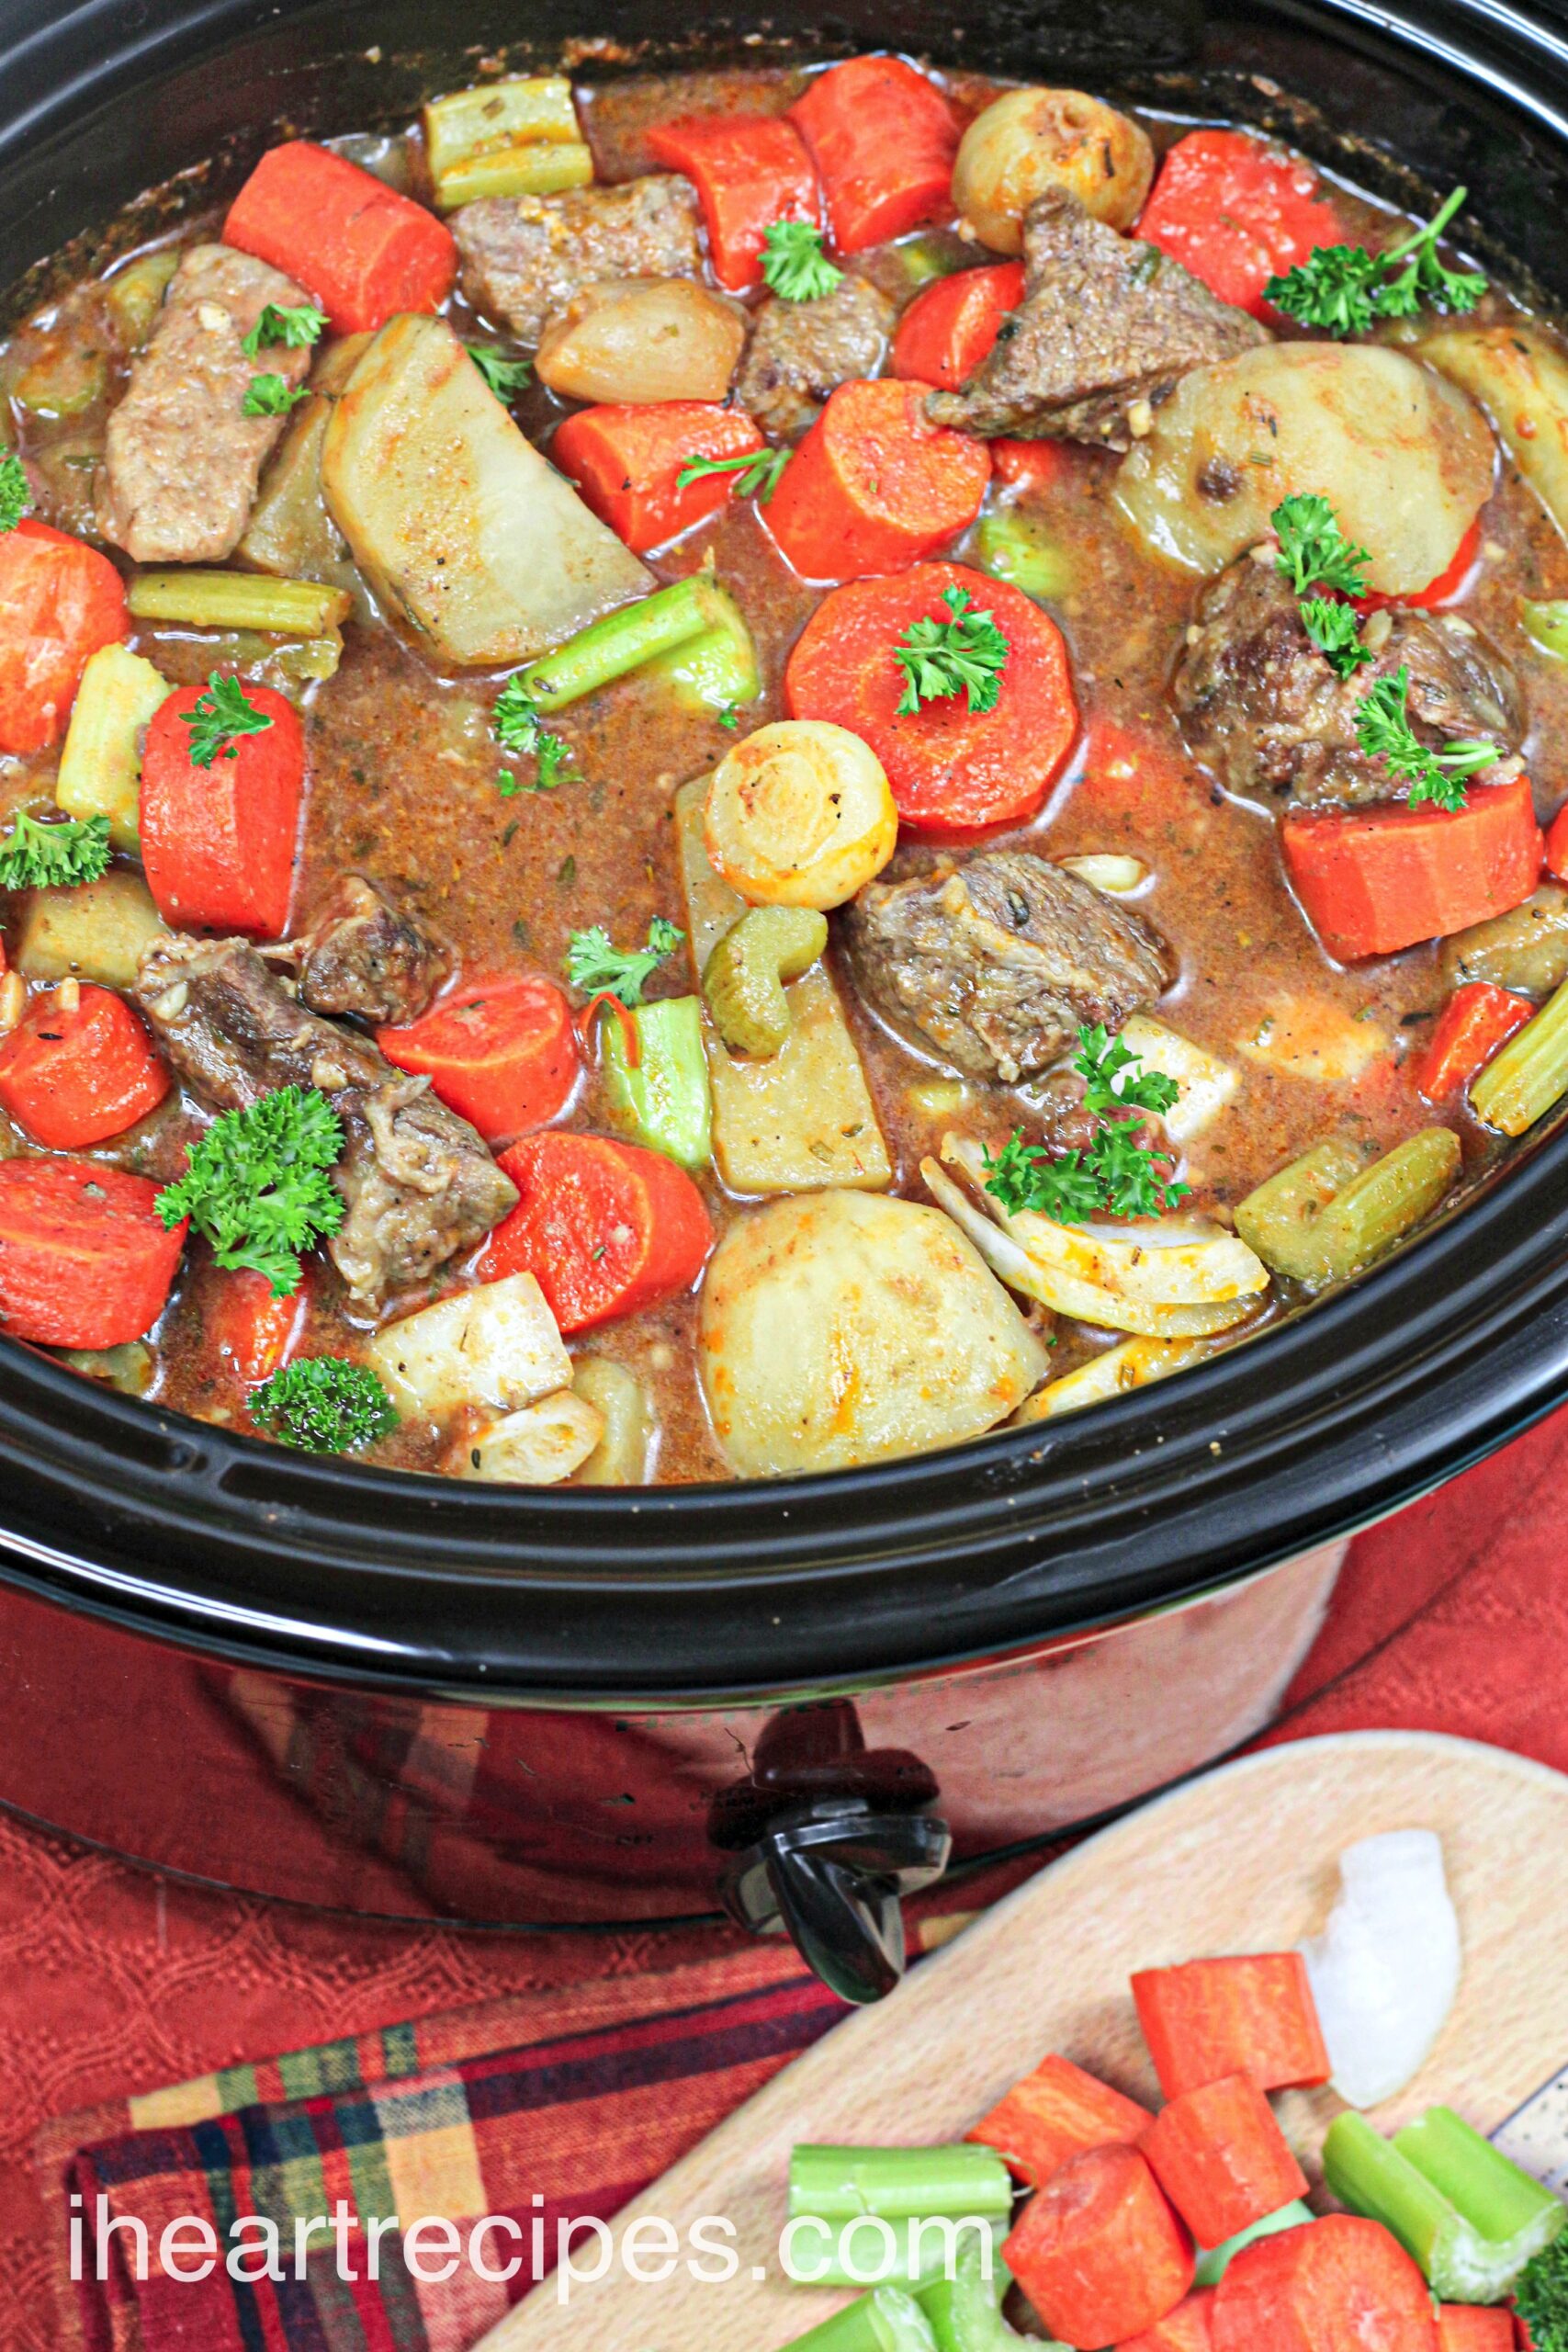 https://iheartrecipes.com/wp-content/uploads/2022/12/easy-slow-cooker-beef-stew-scaled.jpg